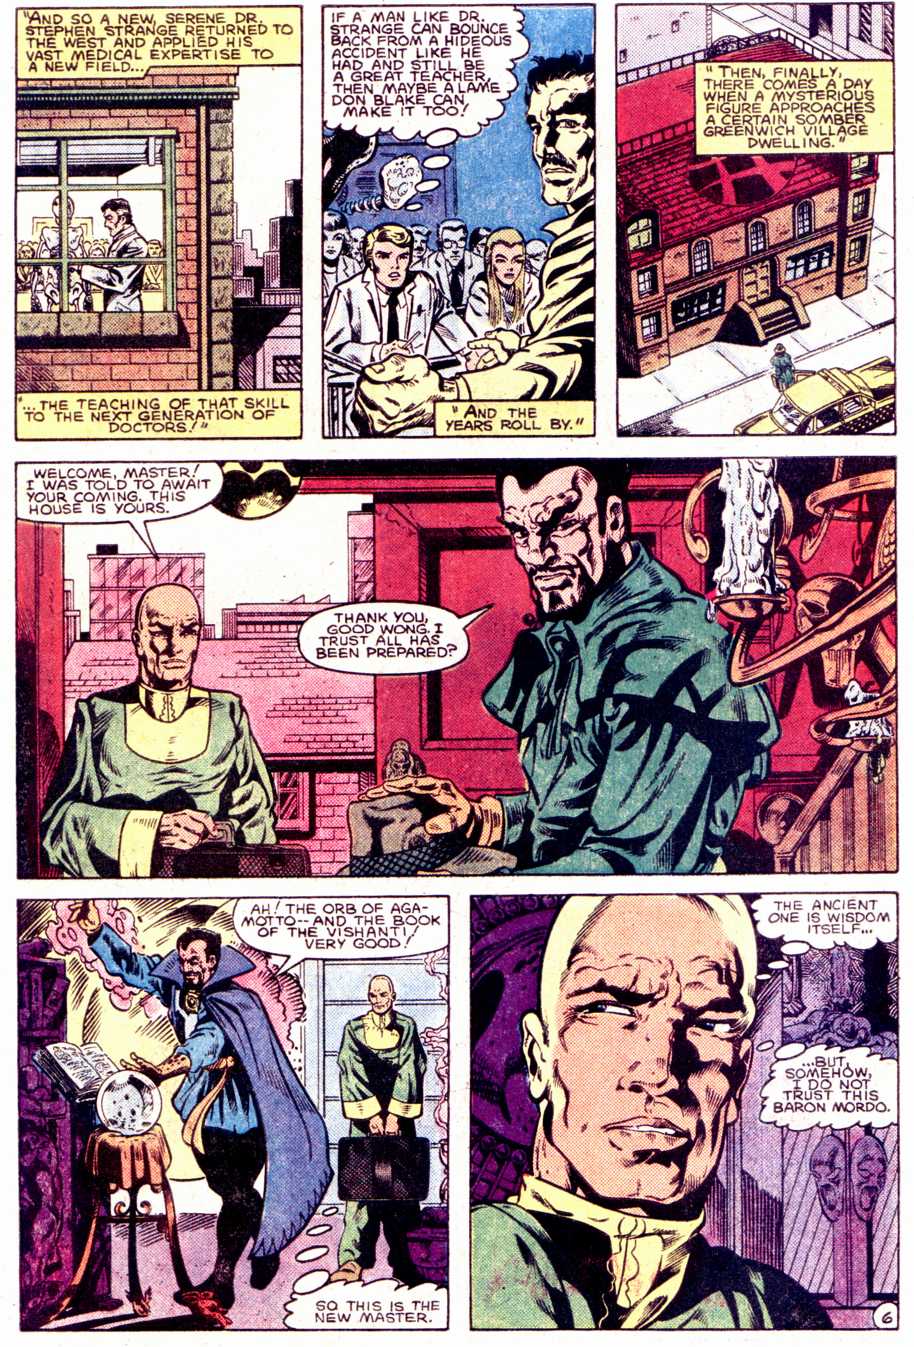 What If? (1977) issue 40 - Dr Strange had not become master of The mystic arts - Page 7